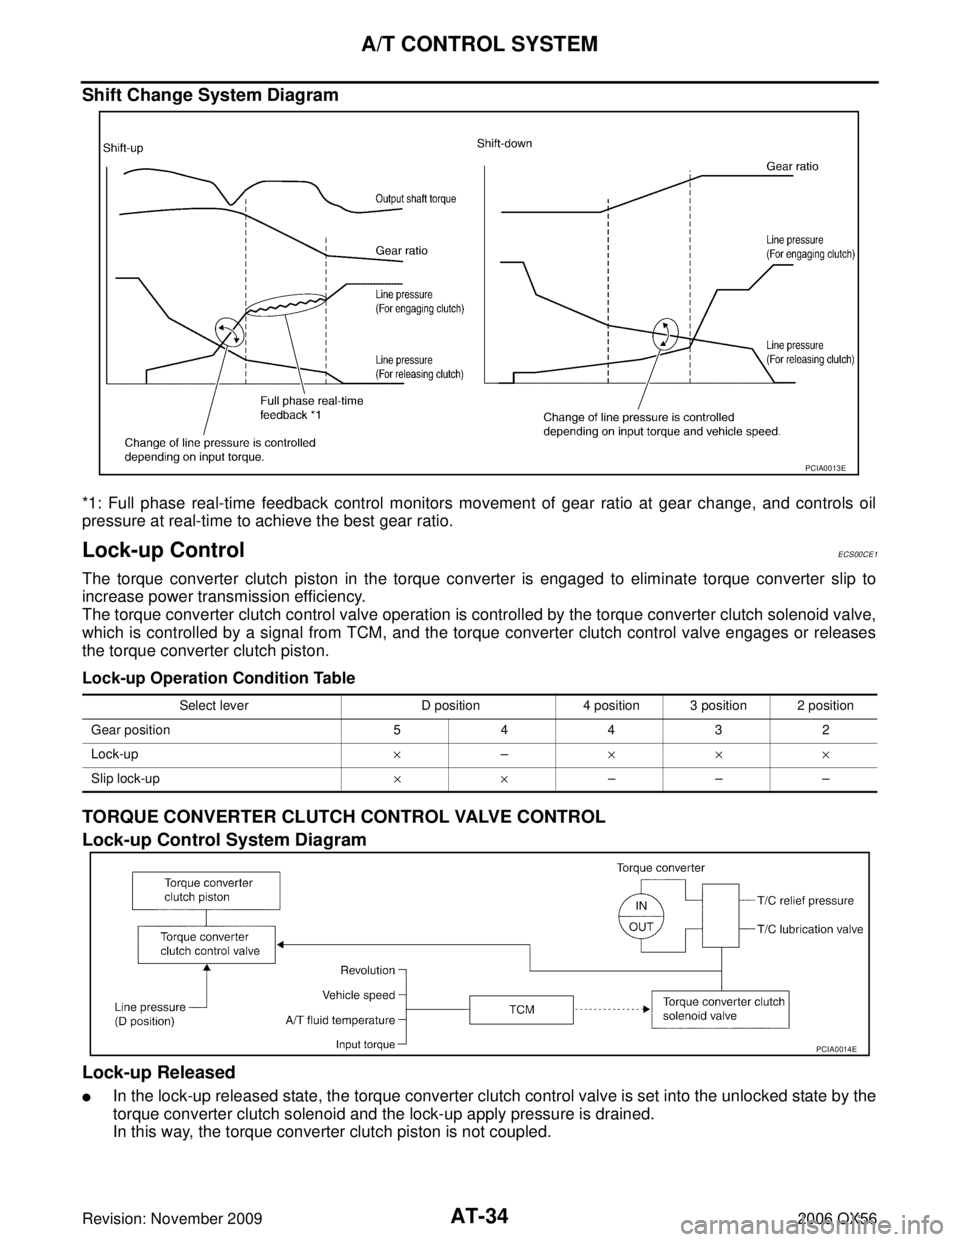 INFINITI QX56 2006  Factory Service Manual AT-34
A/T CONTROL SYSTEM
Revision: November 20092006 QX56
Shift Change System Diagram
*1: Full phase real-time feedback control monitors movement of gear ratio at gear change, and controls oil
pressur